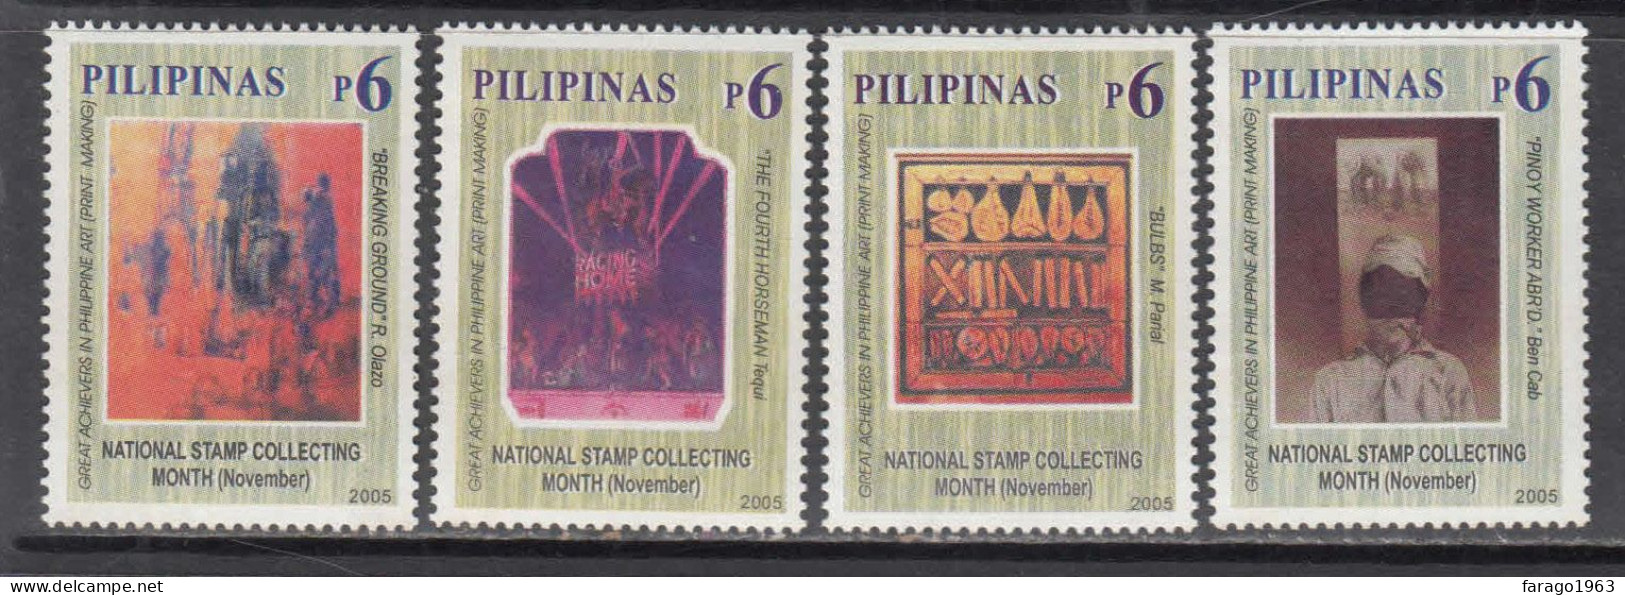 2005 Philippines National Stamp Collecting Month Art Prints Complete Set Of 4 MNH - Philippines